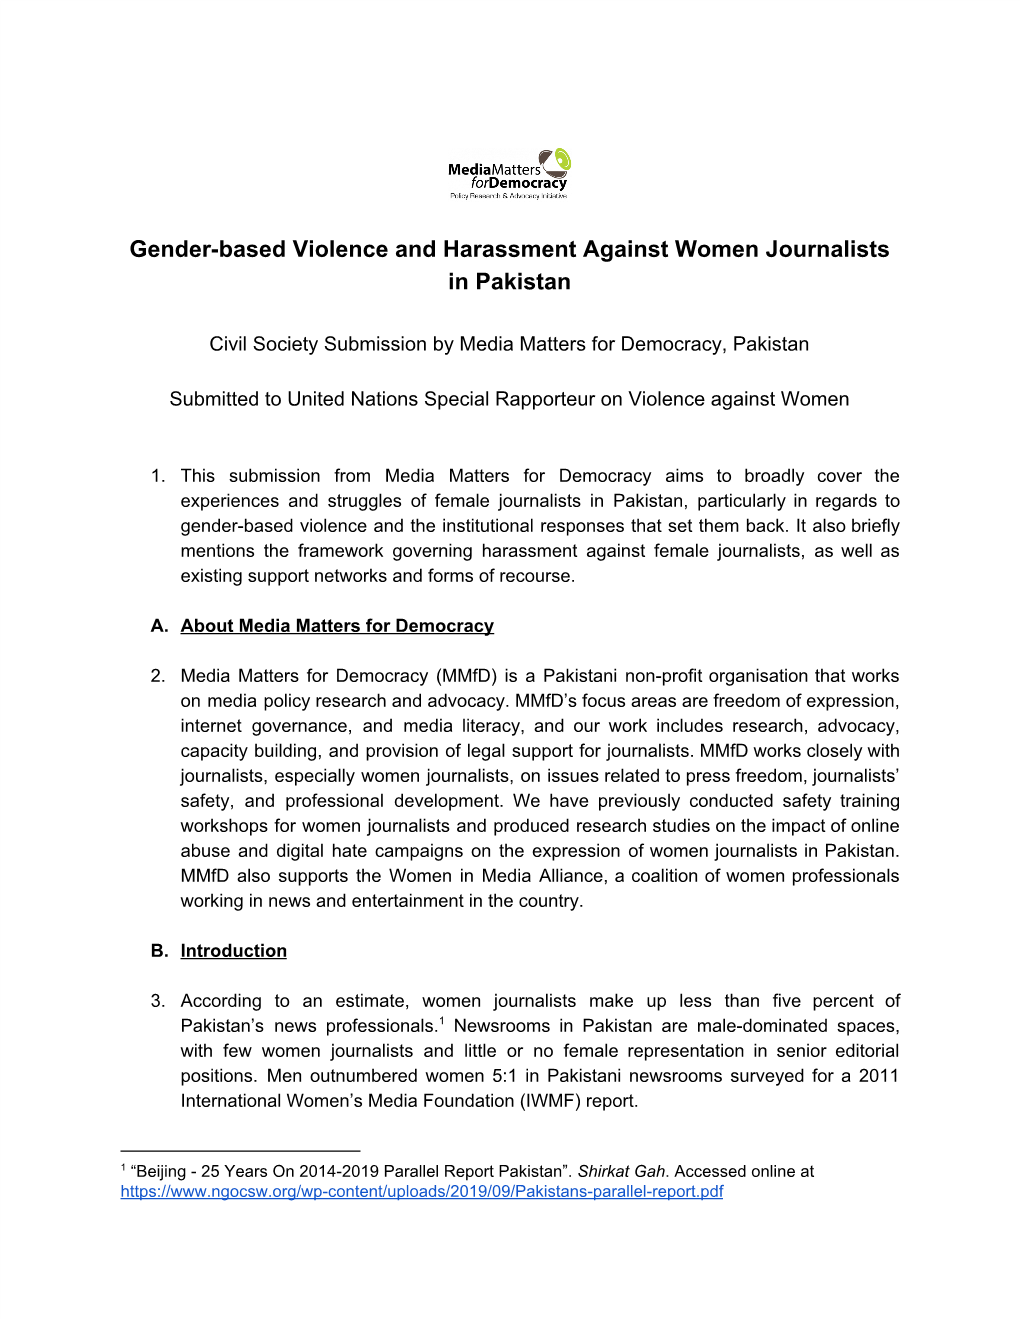 Gender-Based Violence and Harassment Against Women Journalists in Pakistan